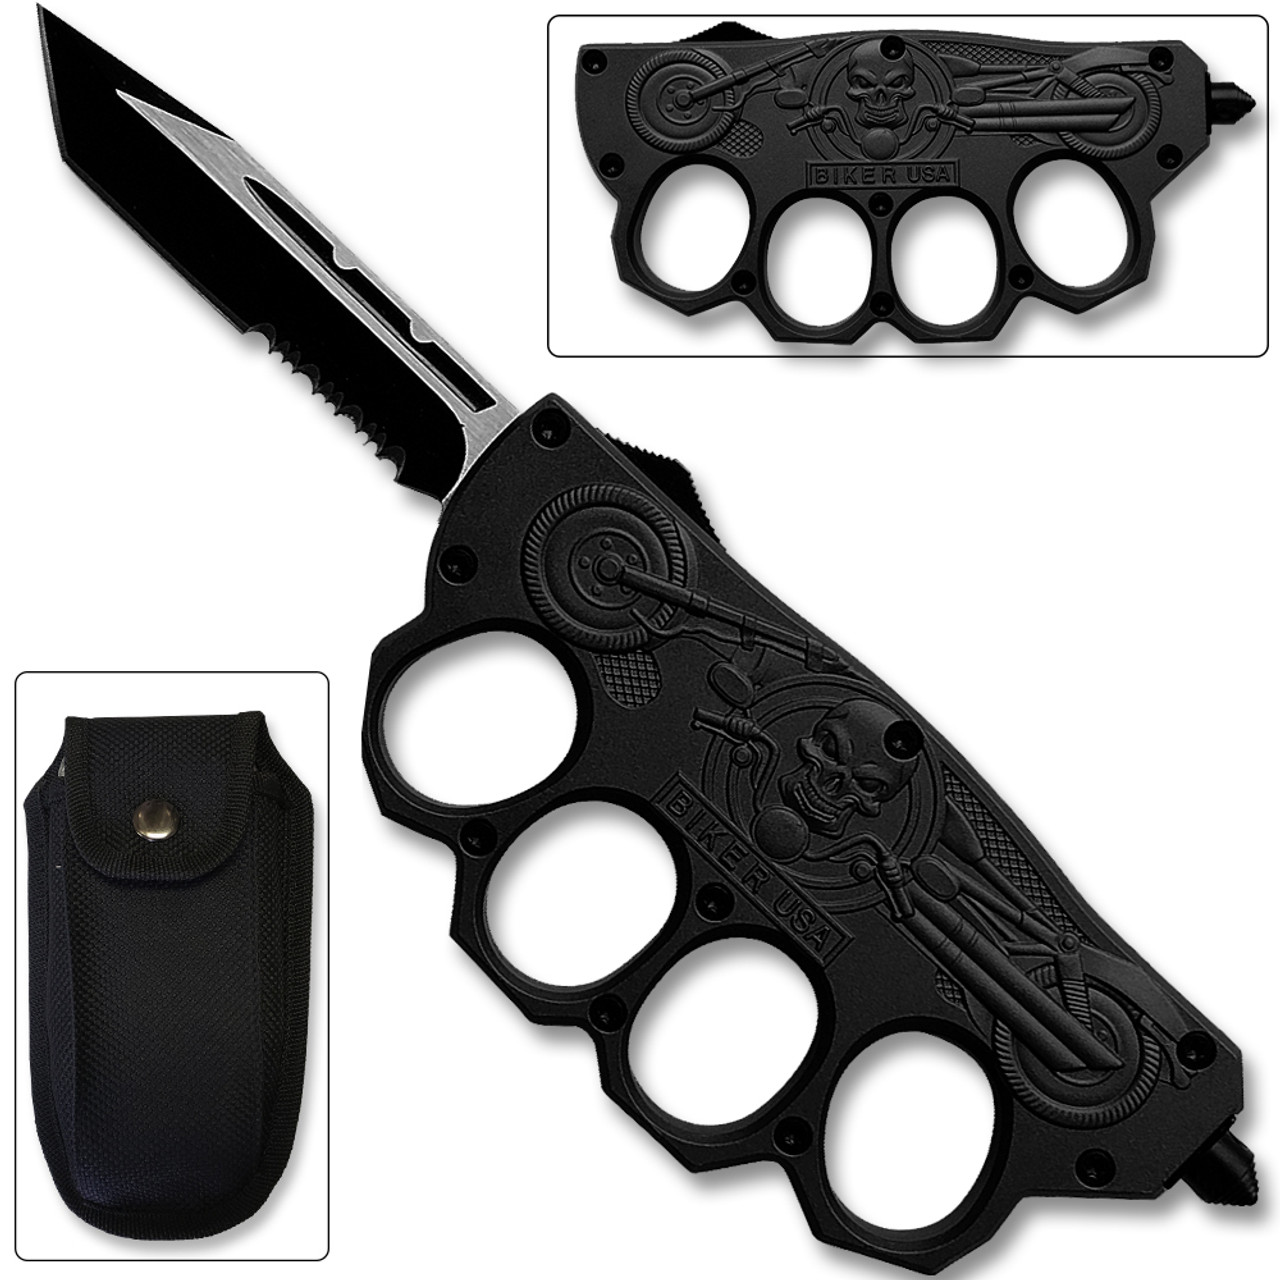 Black 440 stainless steel ace of spades brass knuckles